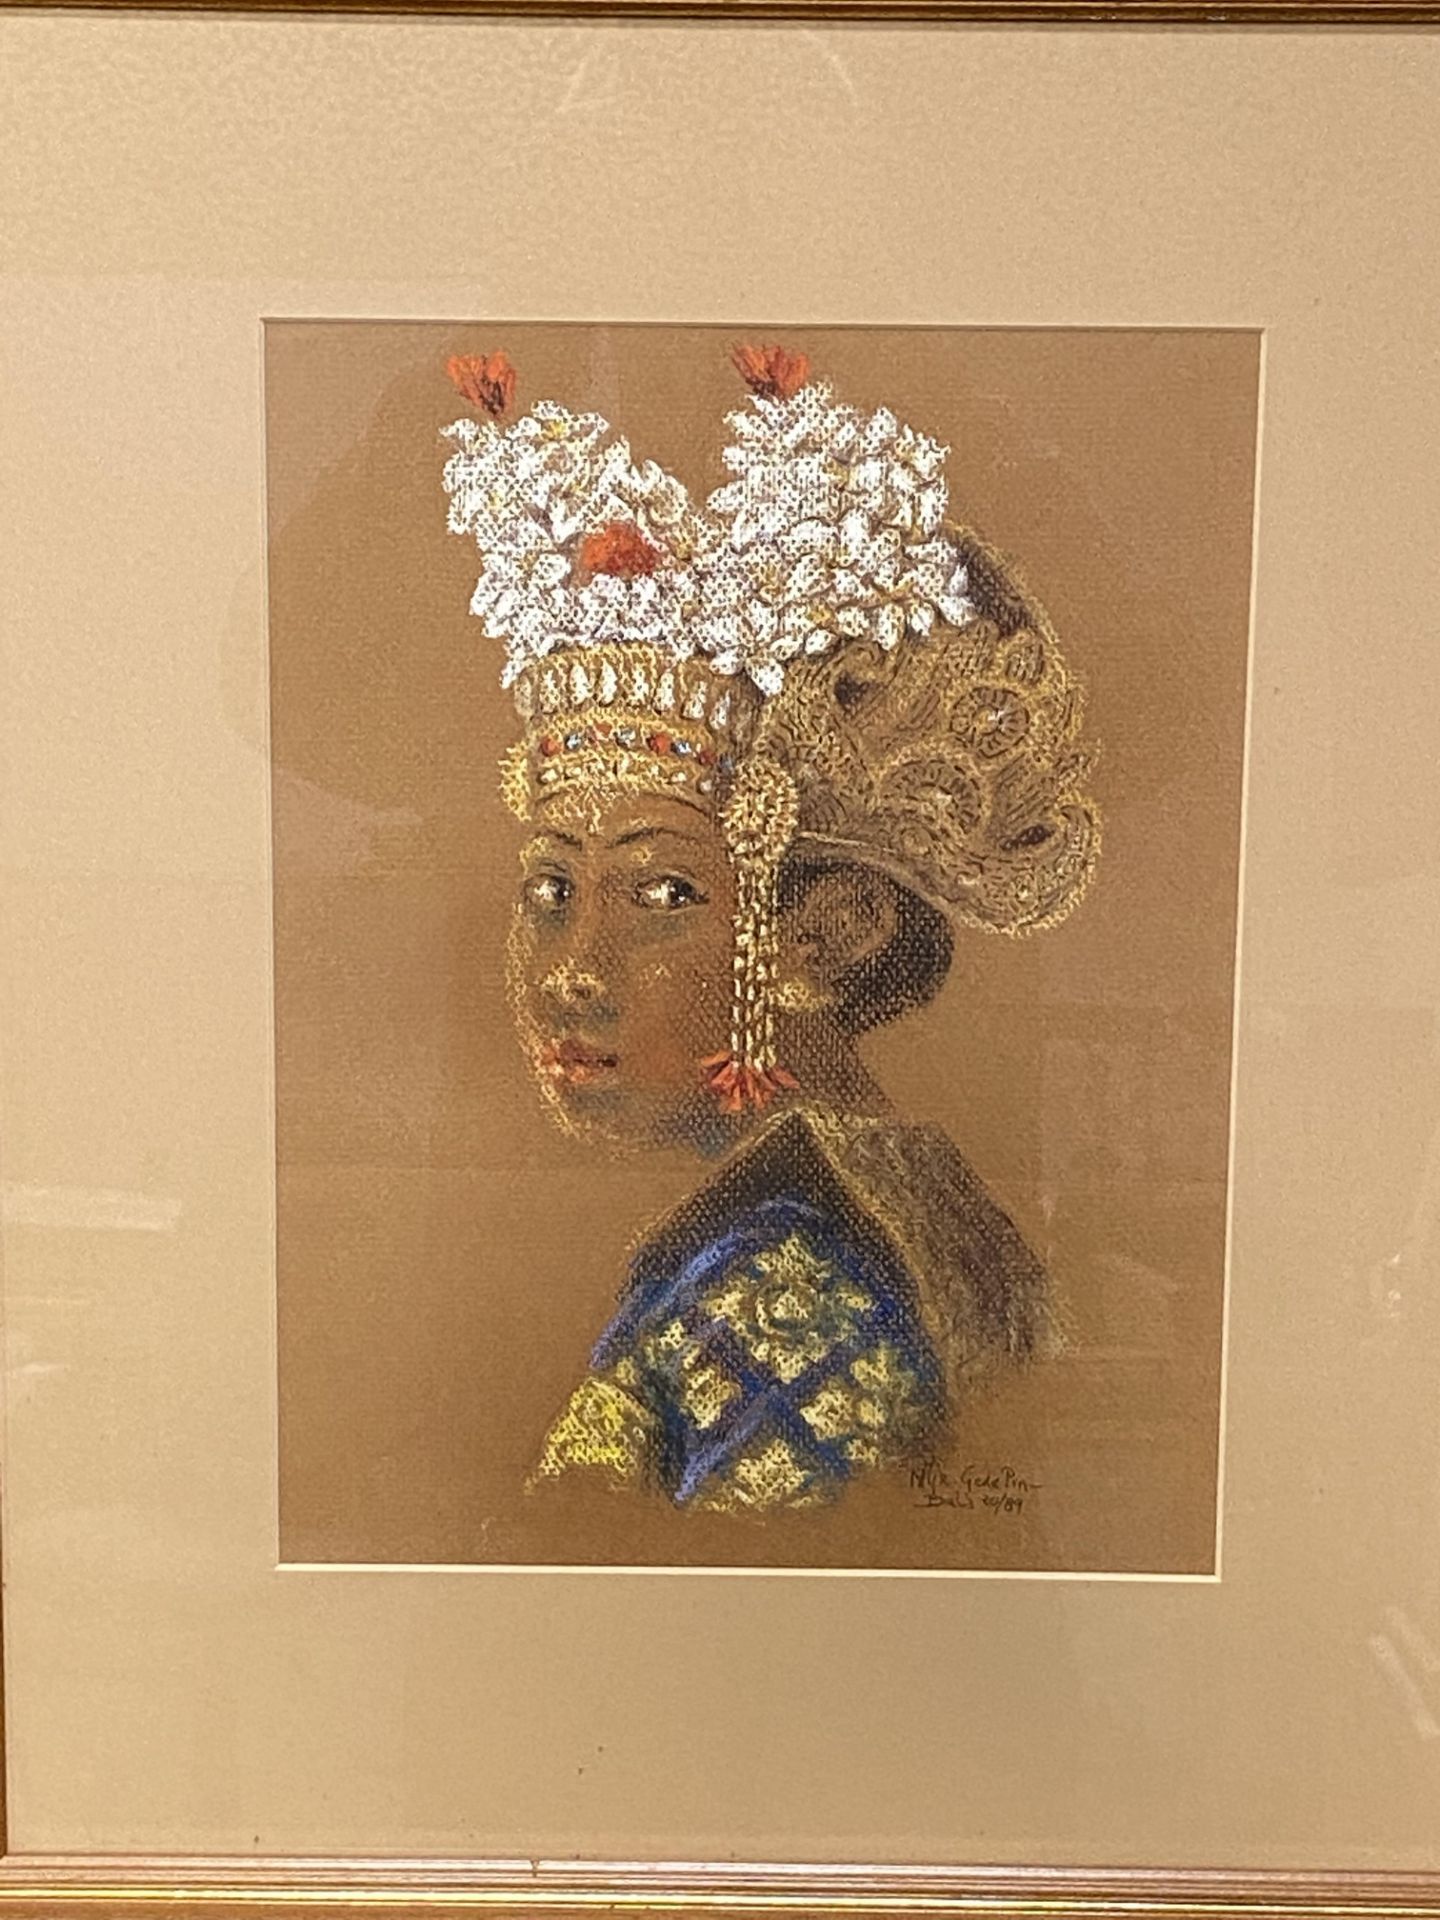 Framed and glazed pastel portrait of a Balinese girl - Image 2 of 3